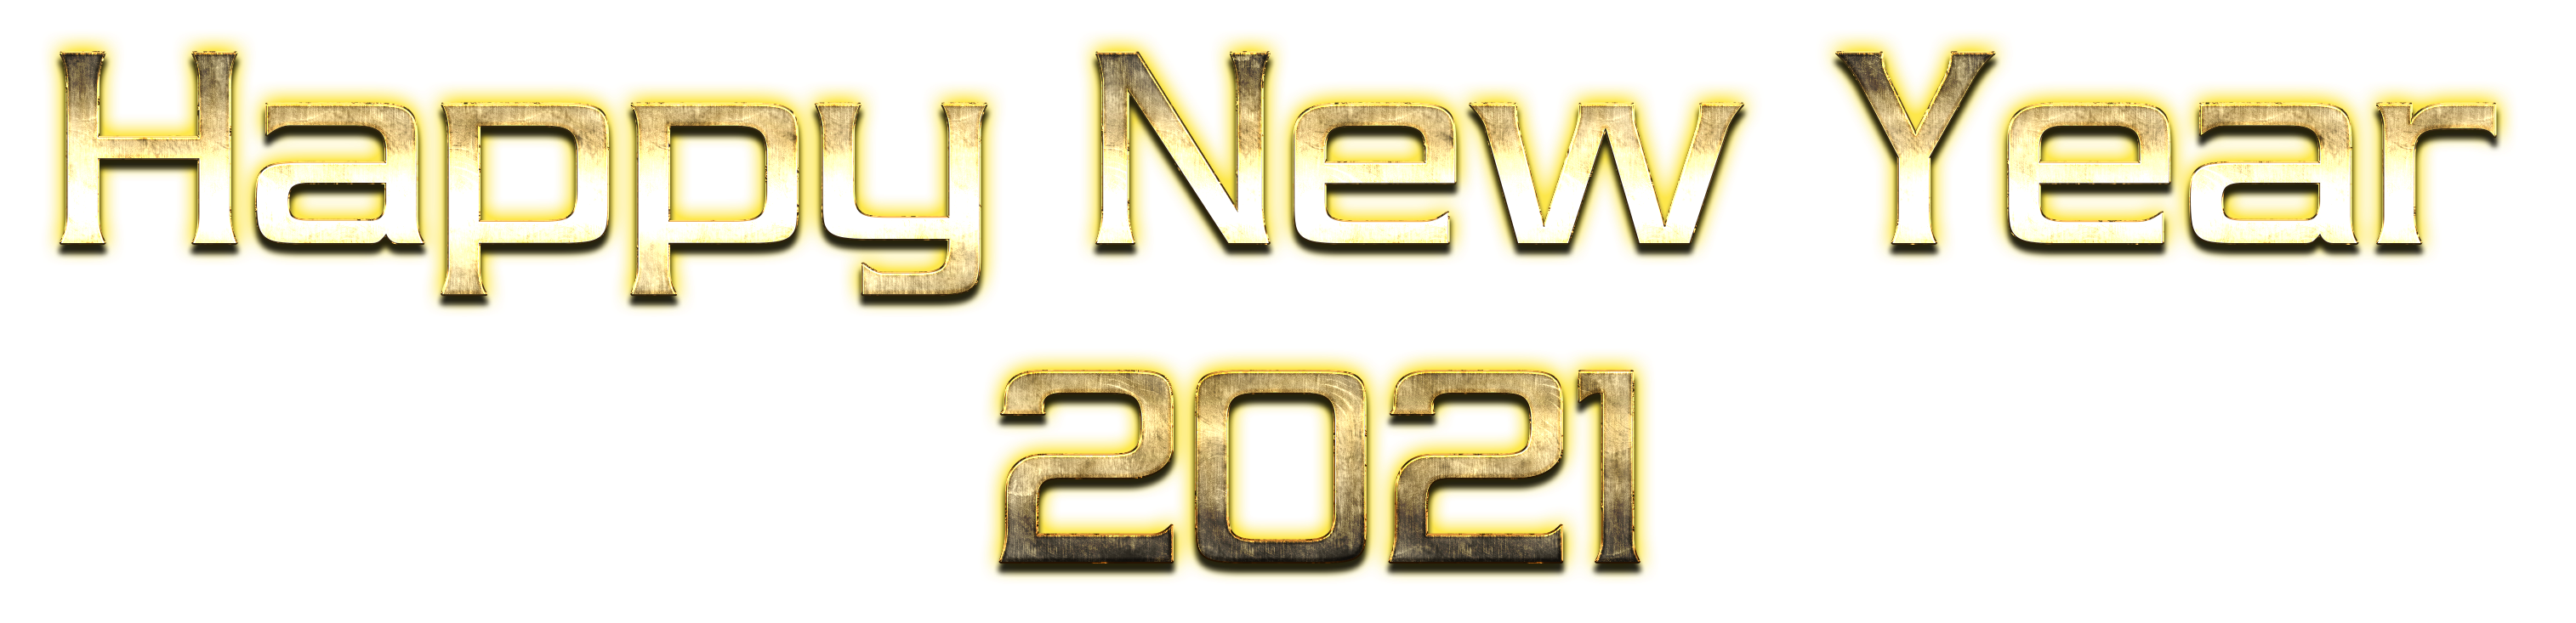 Happy New Year 2021 PNG Image Background